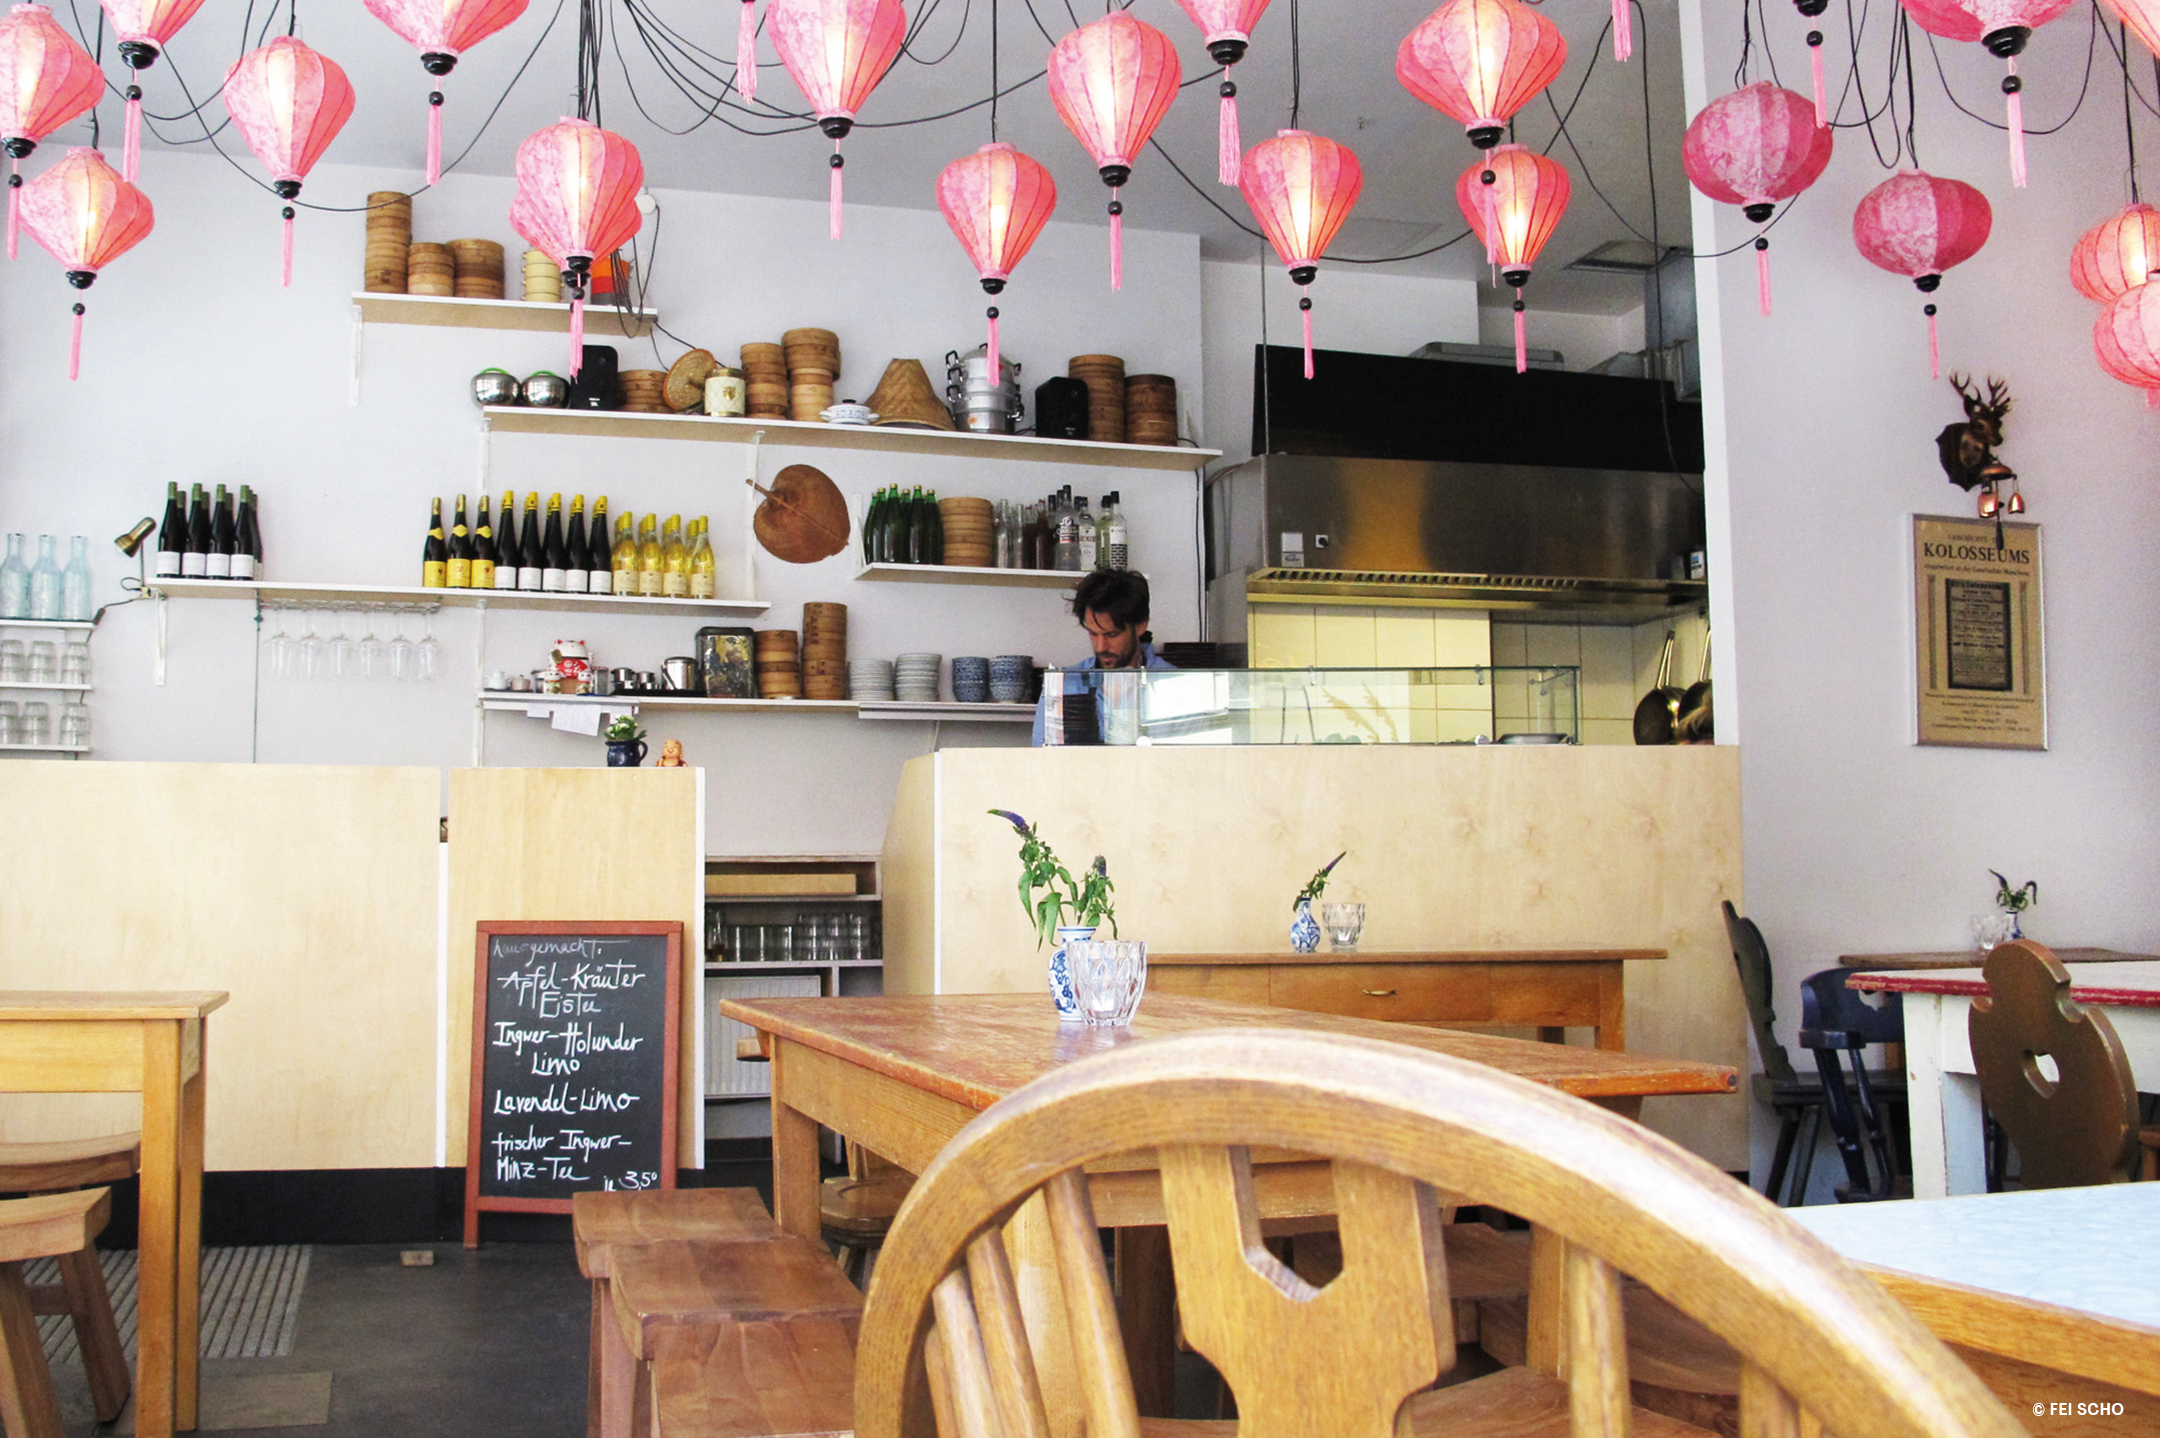 Restaurant with traditional-looking wooden chairs, benches and tables and a light wooden counter, pink Asian lanterns hanging from the ceiling